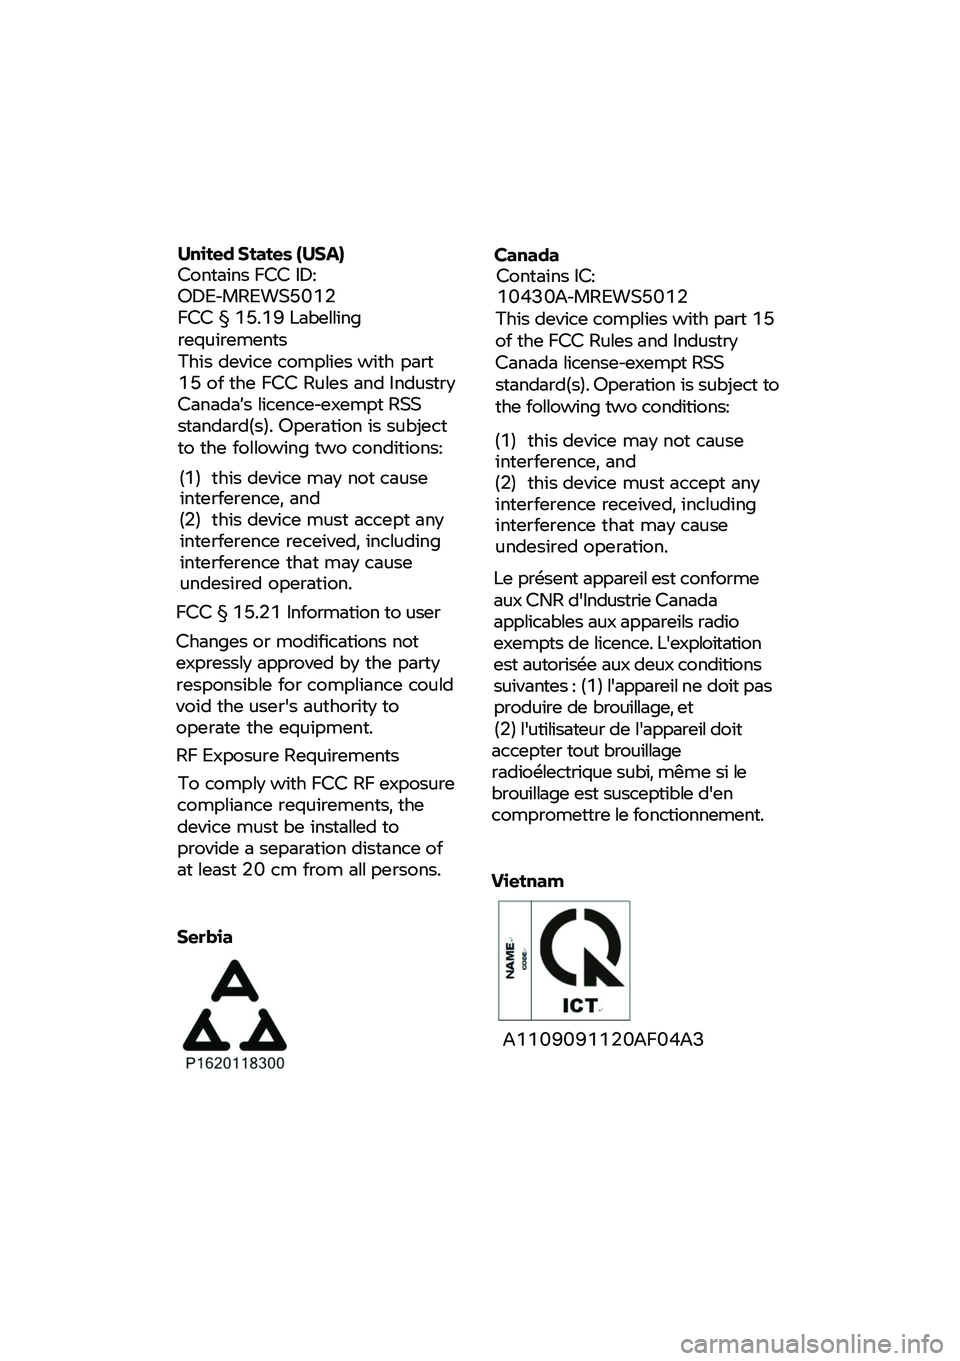 BMW MOTORRAD CE 04 2021  Handleiding (in Dutch)  
 
 
 
United States (USA) Contains FCC ID: ODE-MREWS5012 FCC § 15.19 Labelling requirements This device complies with part 15 of the FCC Rules and Industry Canada’s licence-exempt RSS standard(s)